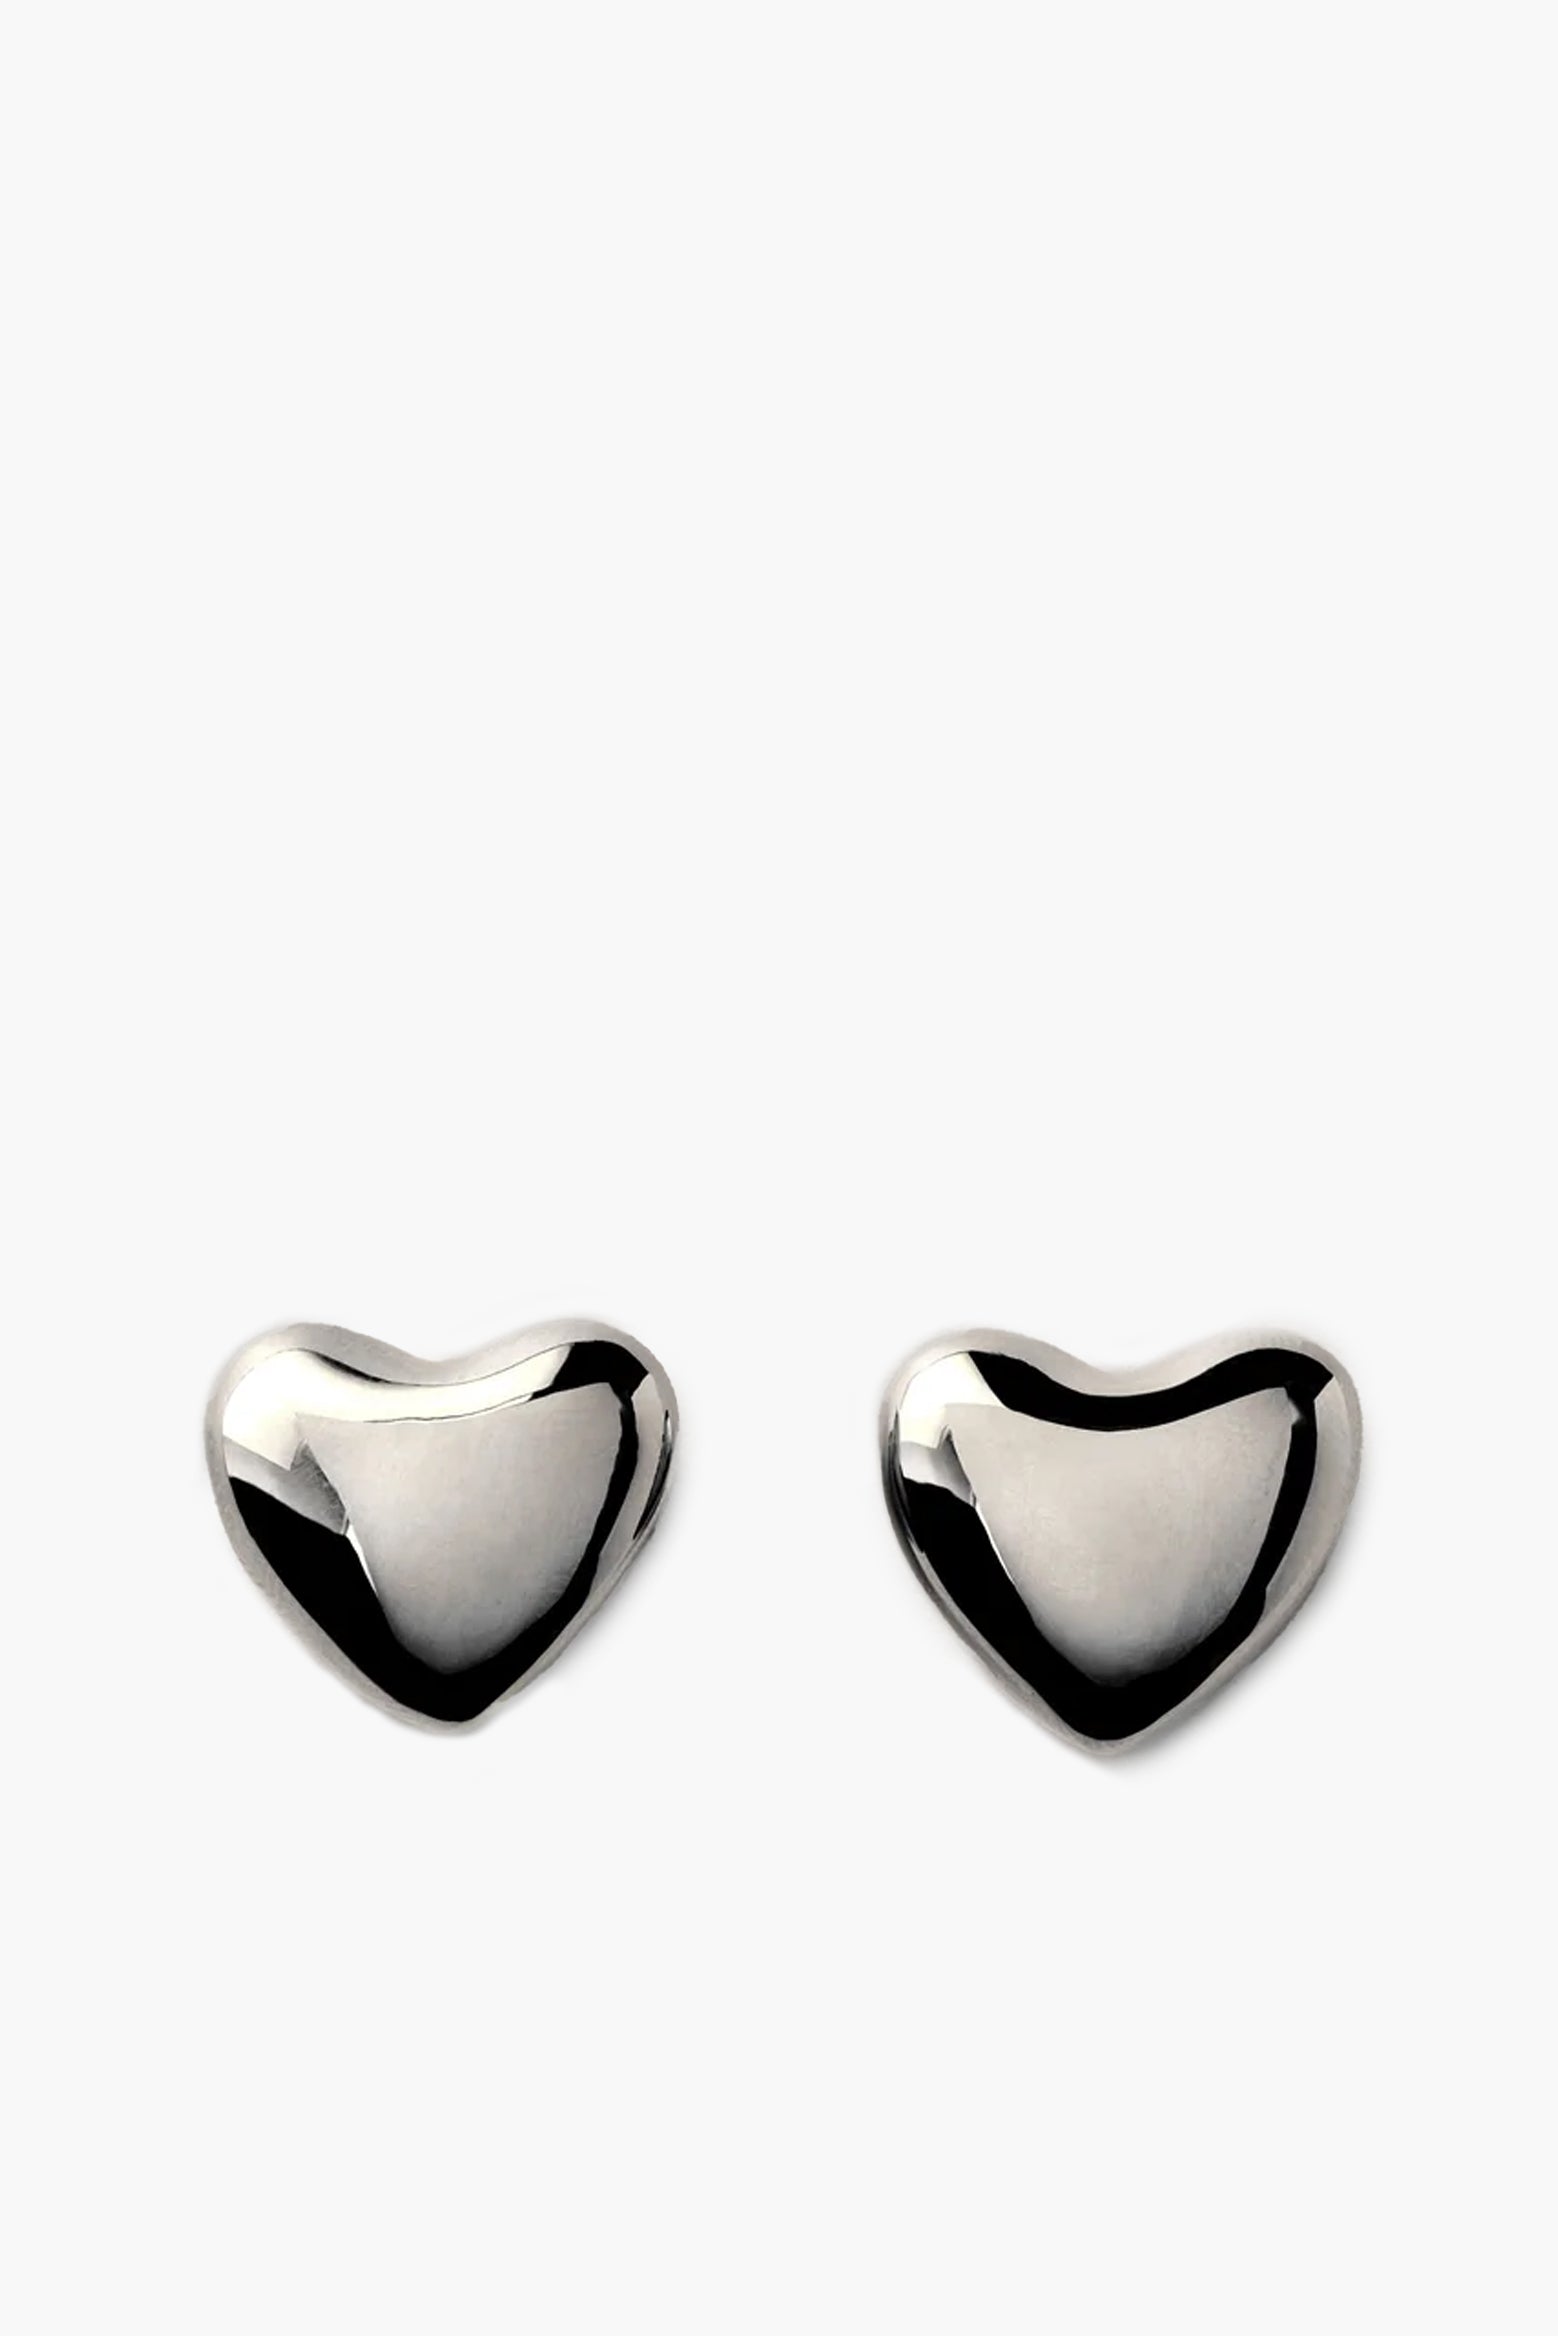 Annika Inez Voluptuous Heart Earring in Silver available at The New Trend Australia. 